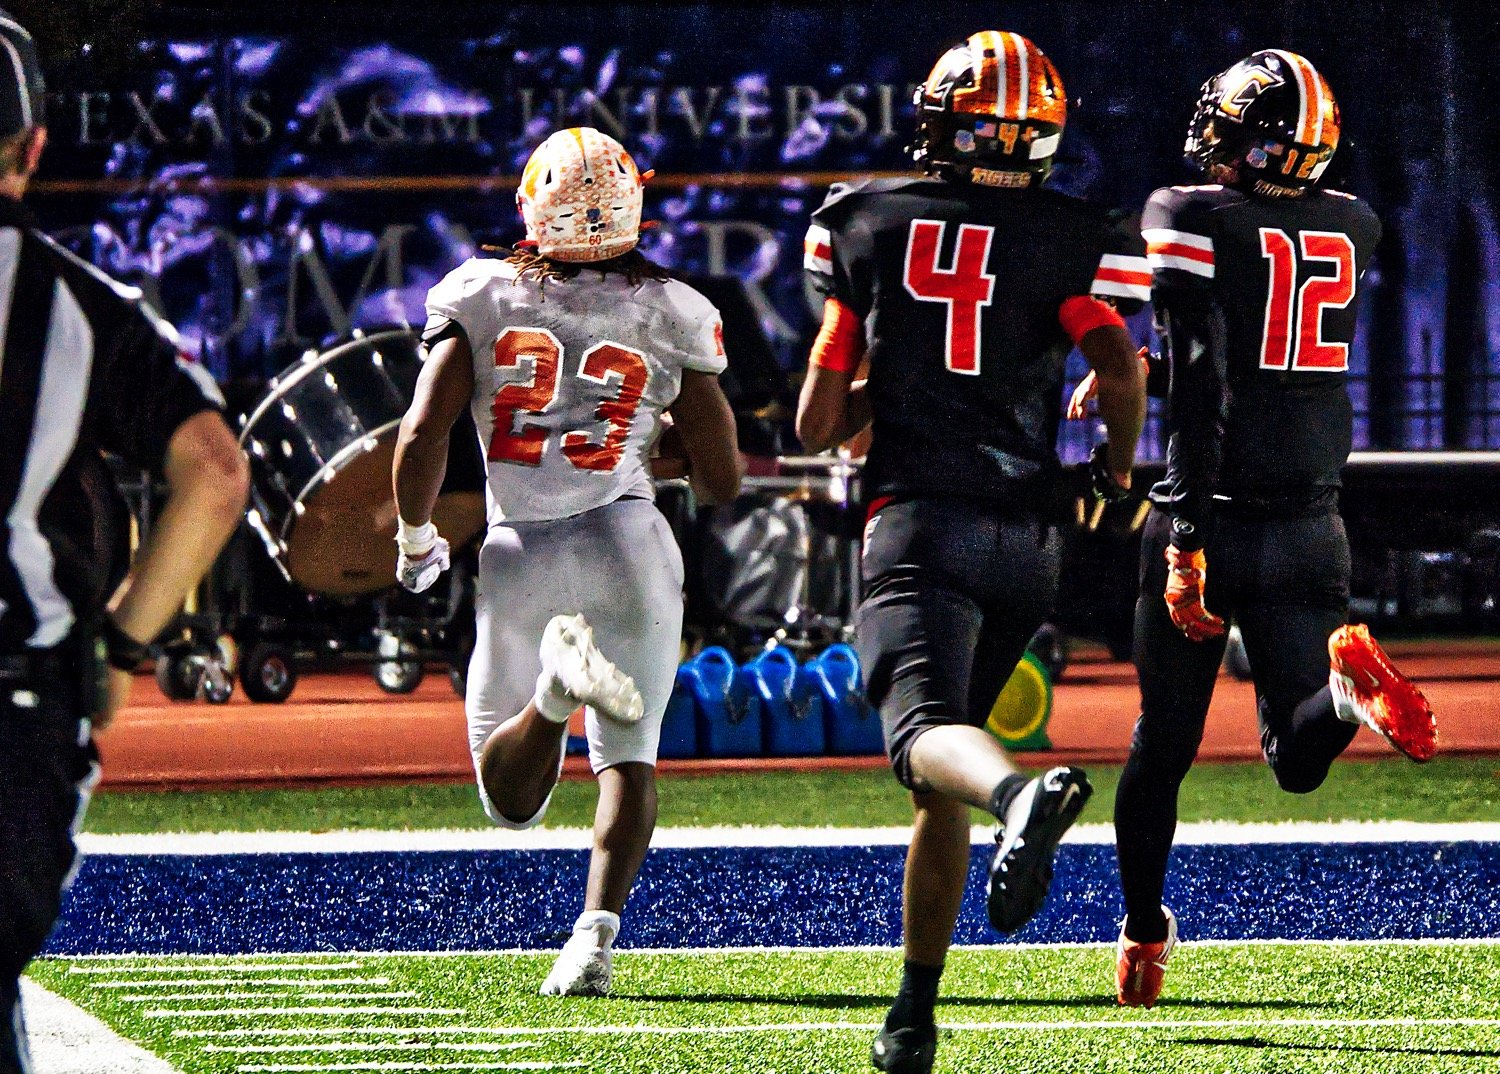 The Commerce defense got a few looks at the back of Trevion Sneed’s number 23 jersey Friday night, including this 68-yard touchdown run in Mineola’s 49-34 victory.
[see more action and buy prints]